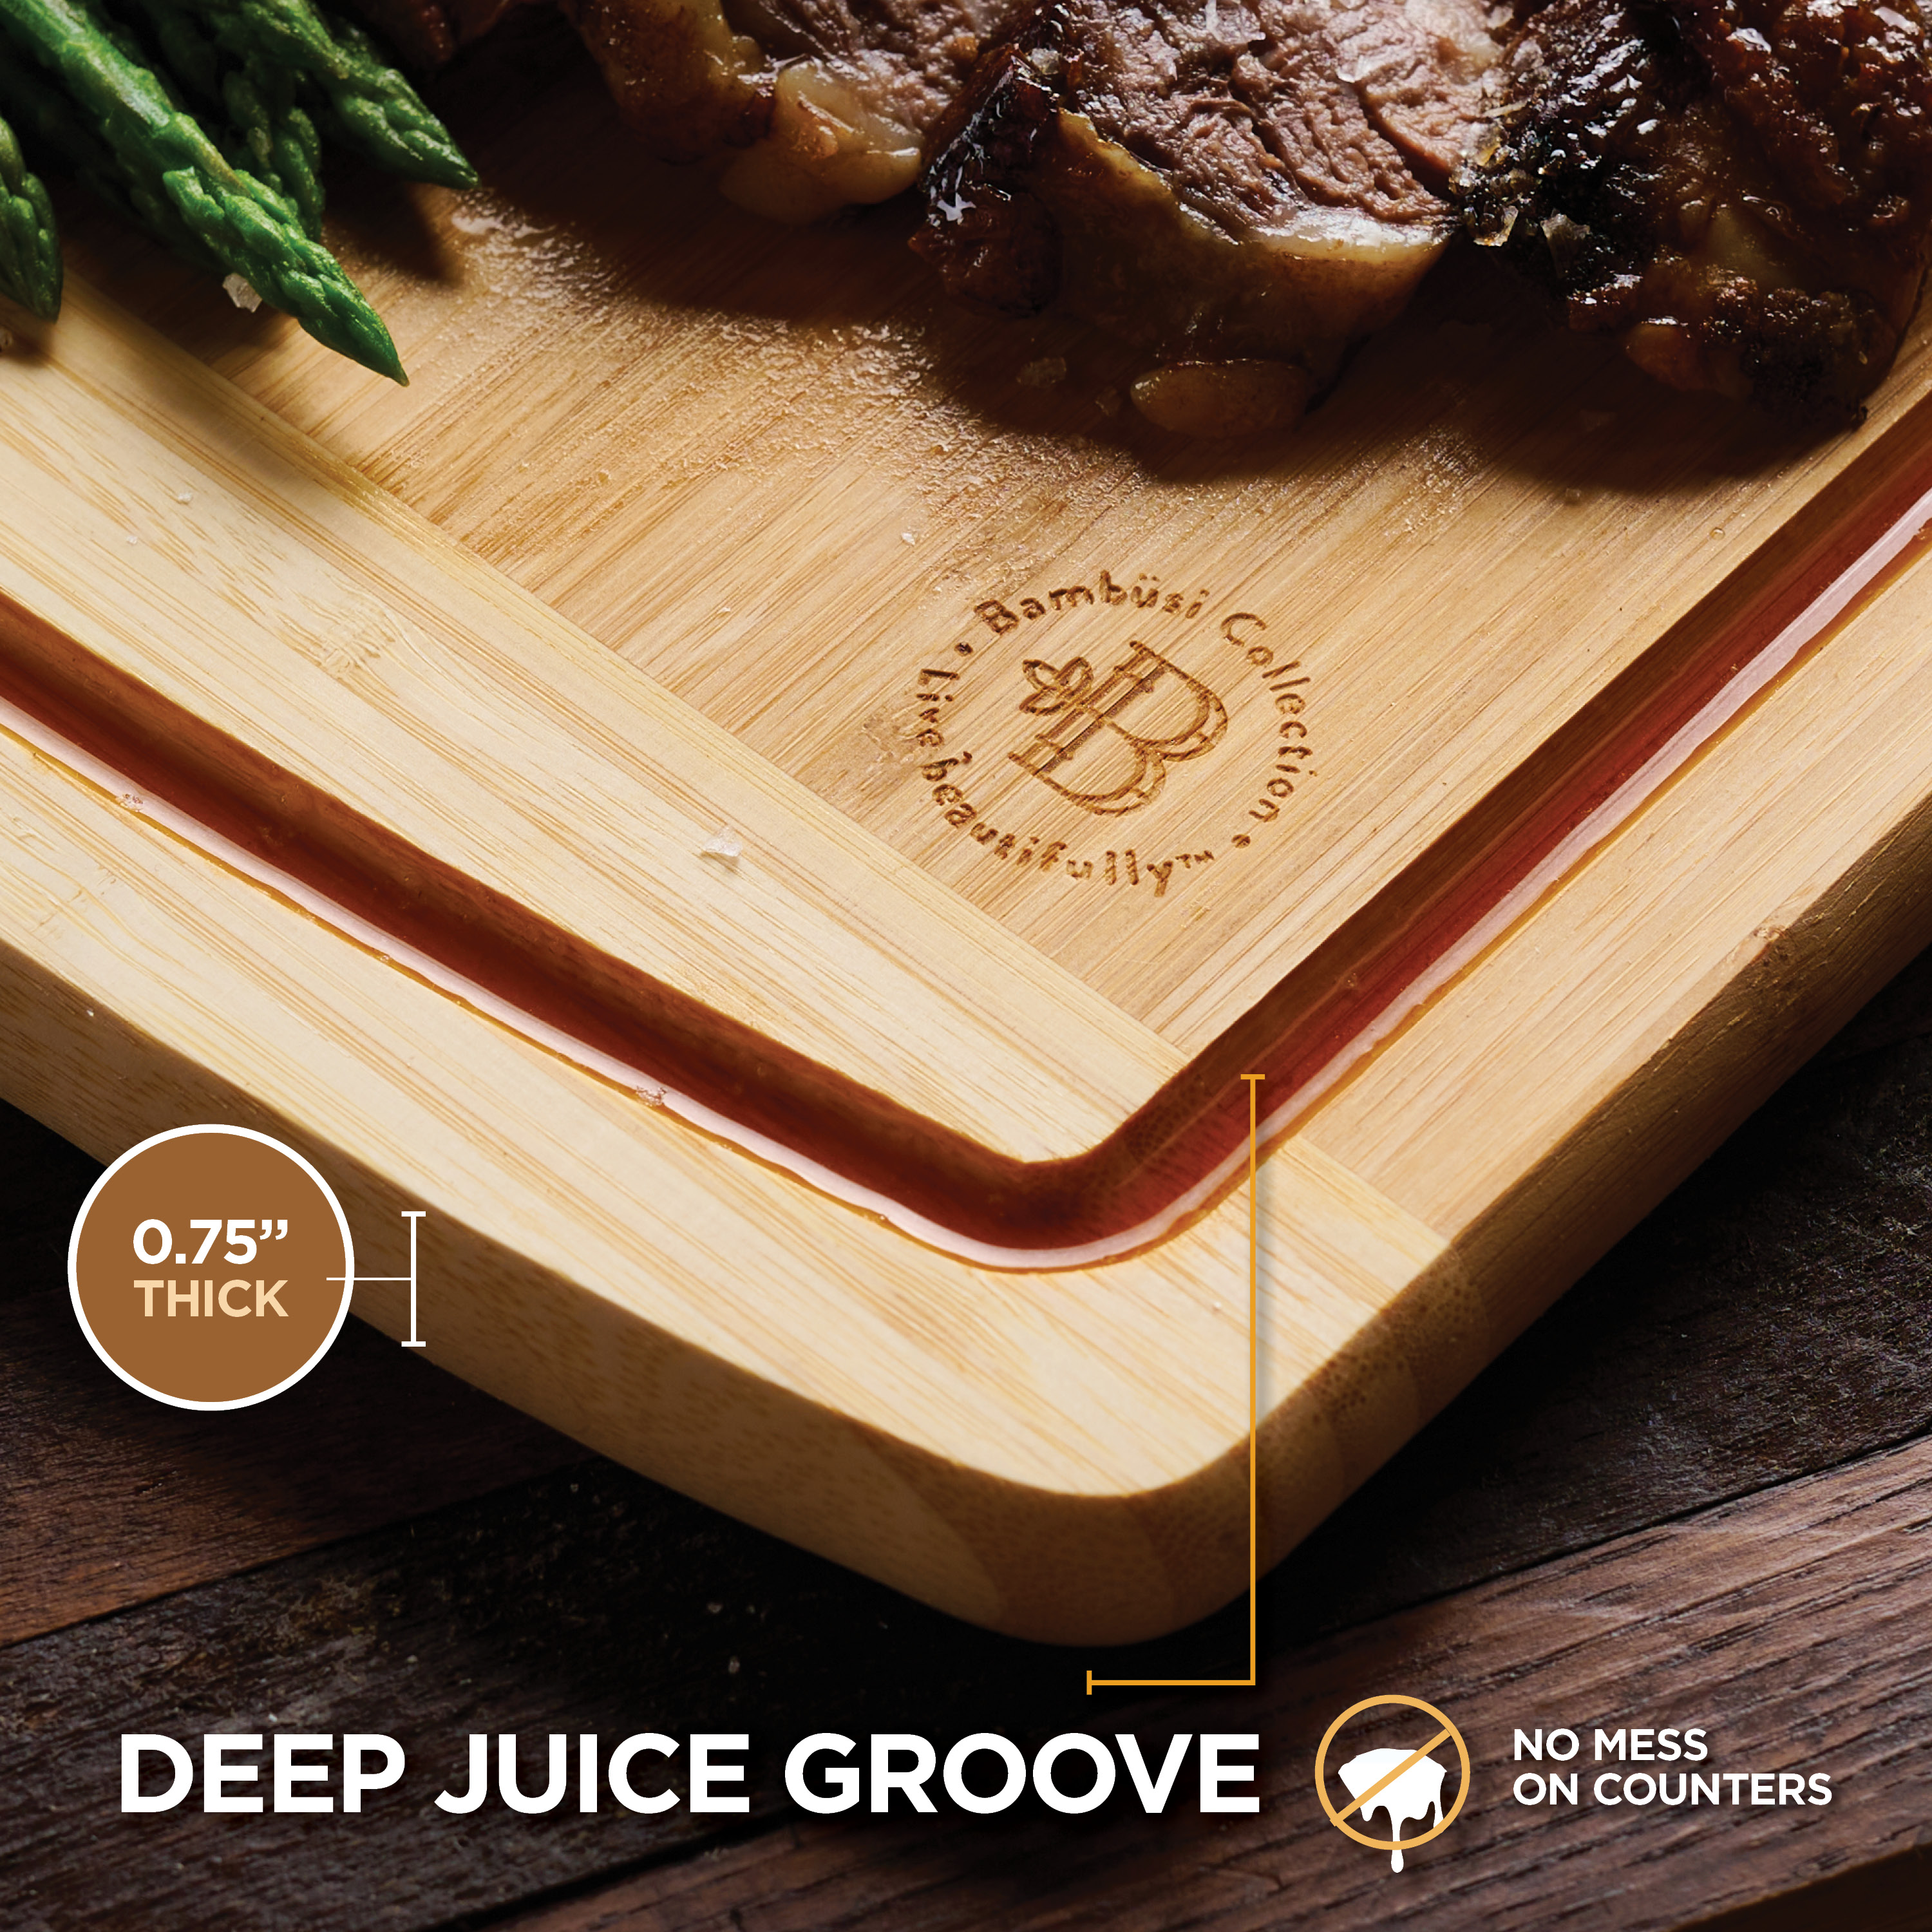 Bambüsi Extra Large Bamboo Cutting Board, Kitchen Chopping Board, Wooden Cutting Board With Juice Grooves. By: Bambusi - image 4 of 7